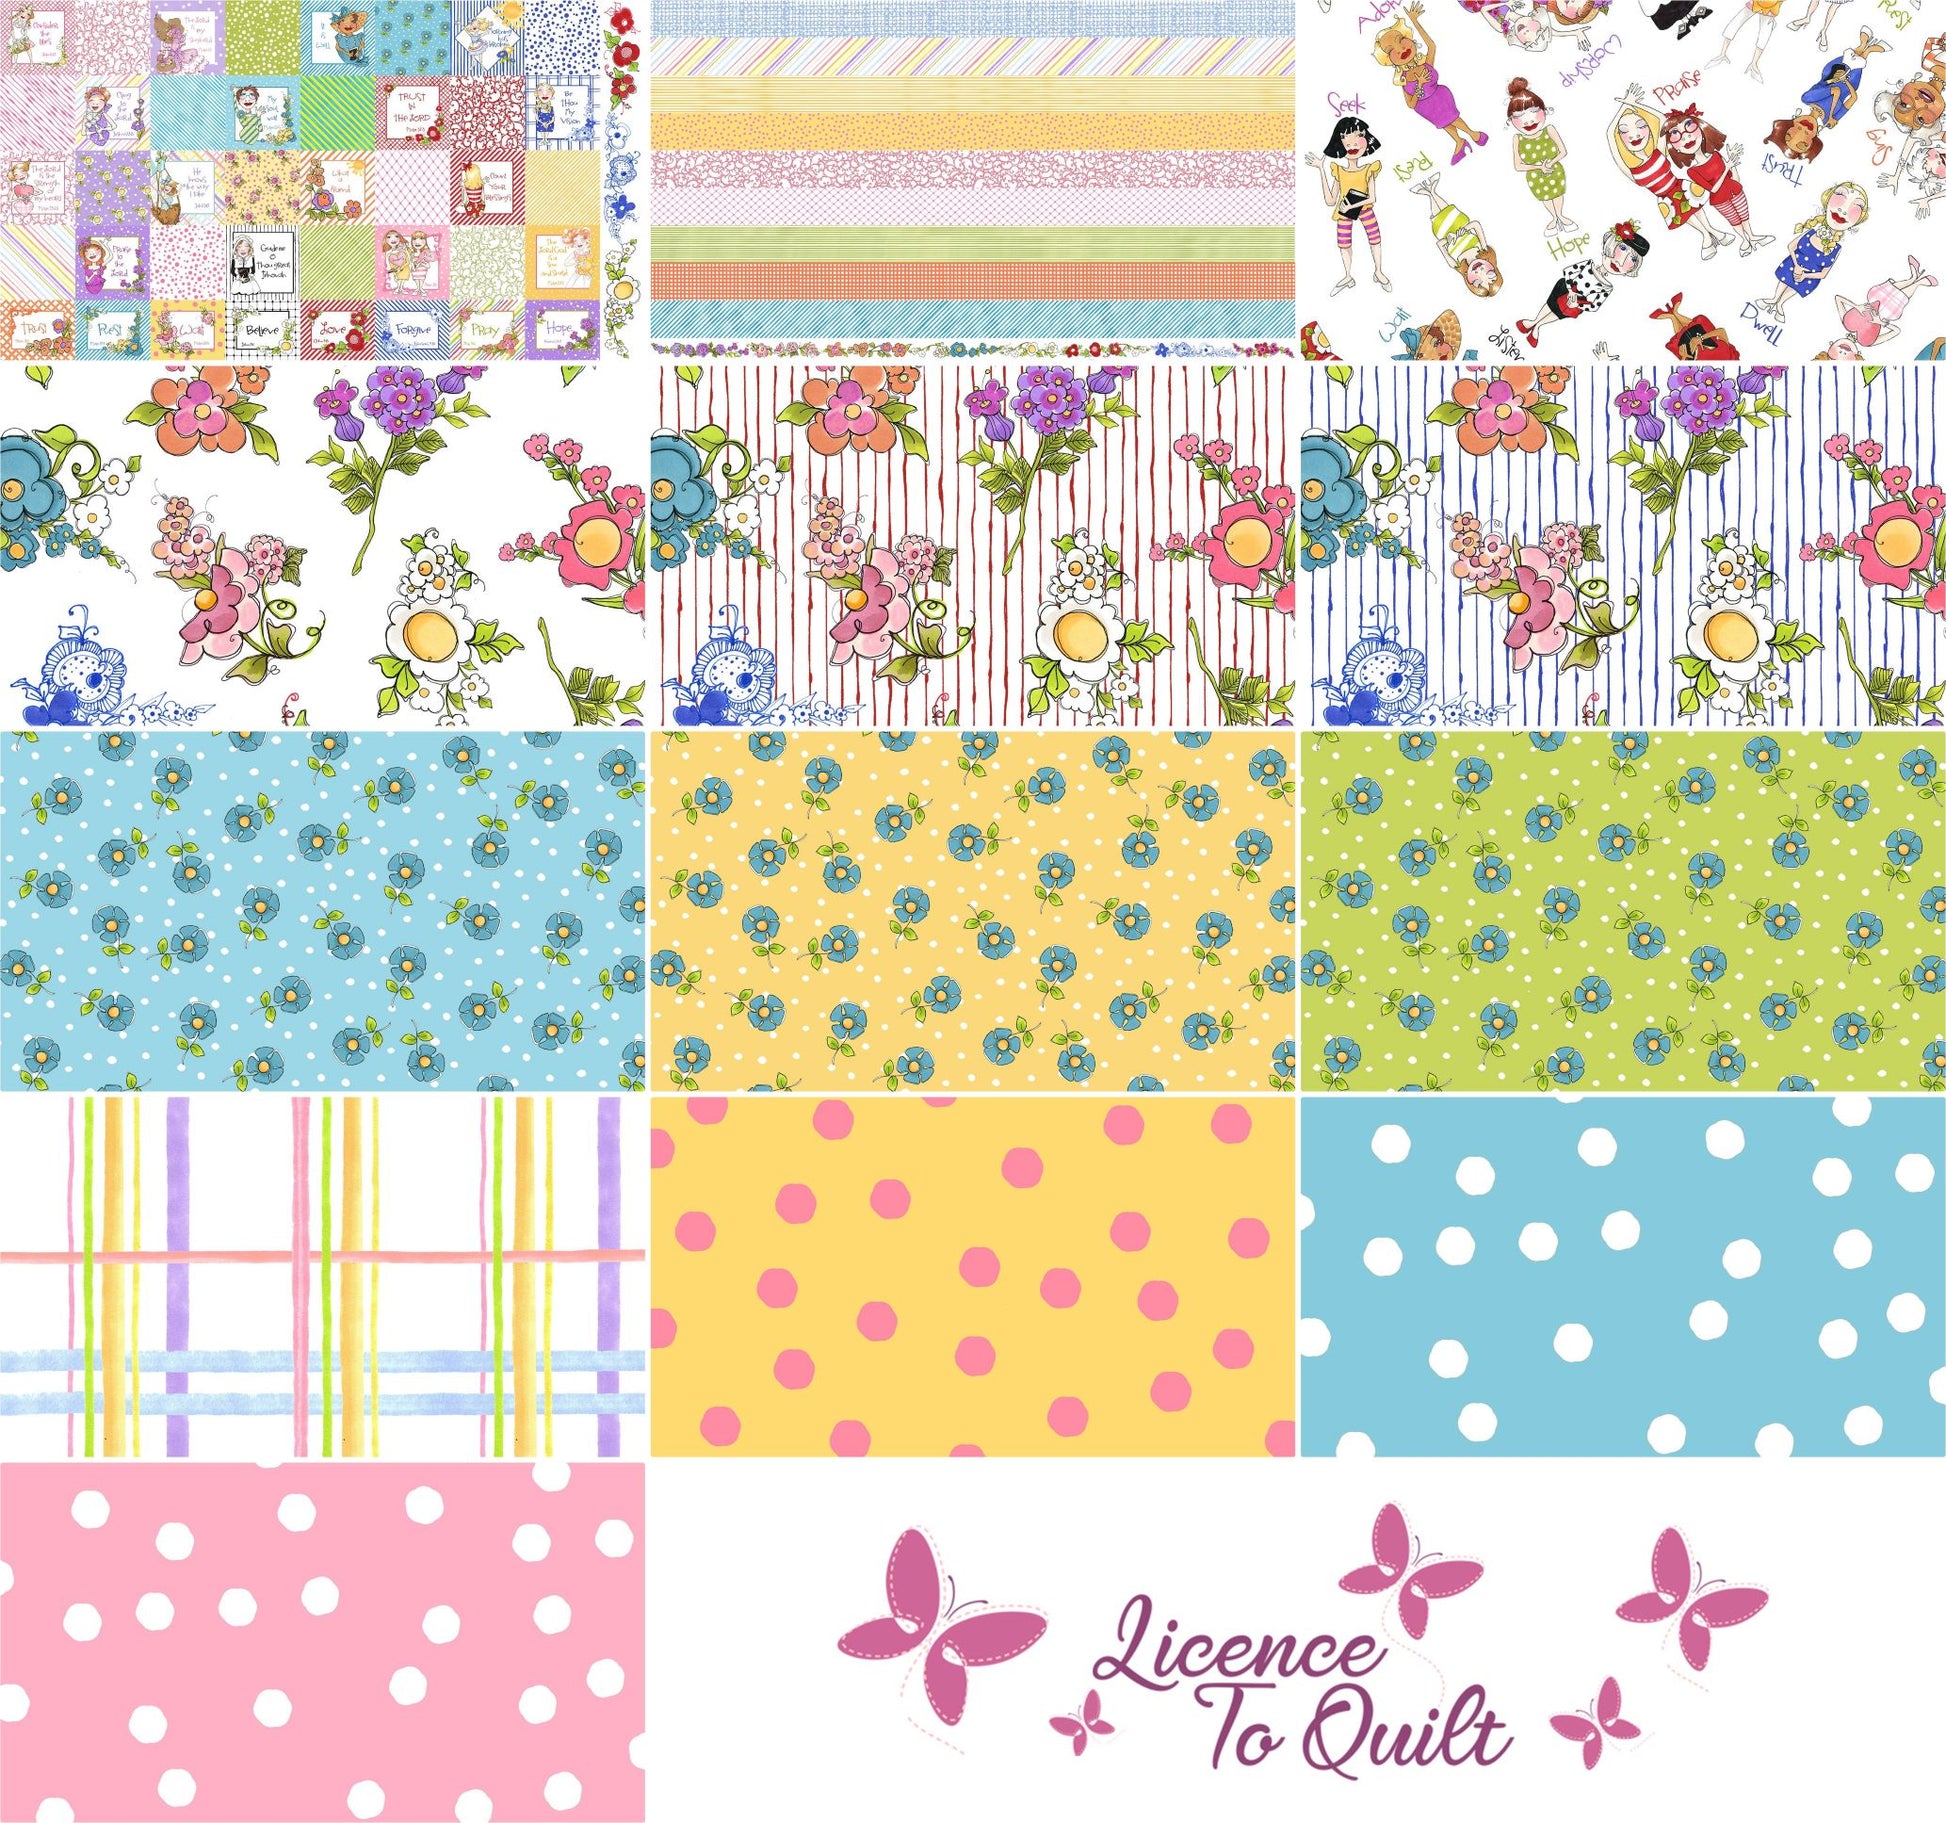 Joy Journey - Daisy Dots Turquoise Fabric - Licence To Quilt